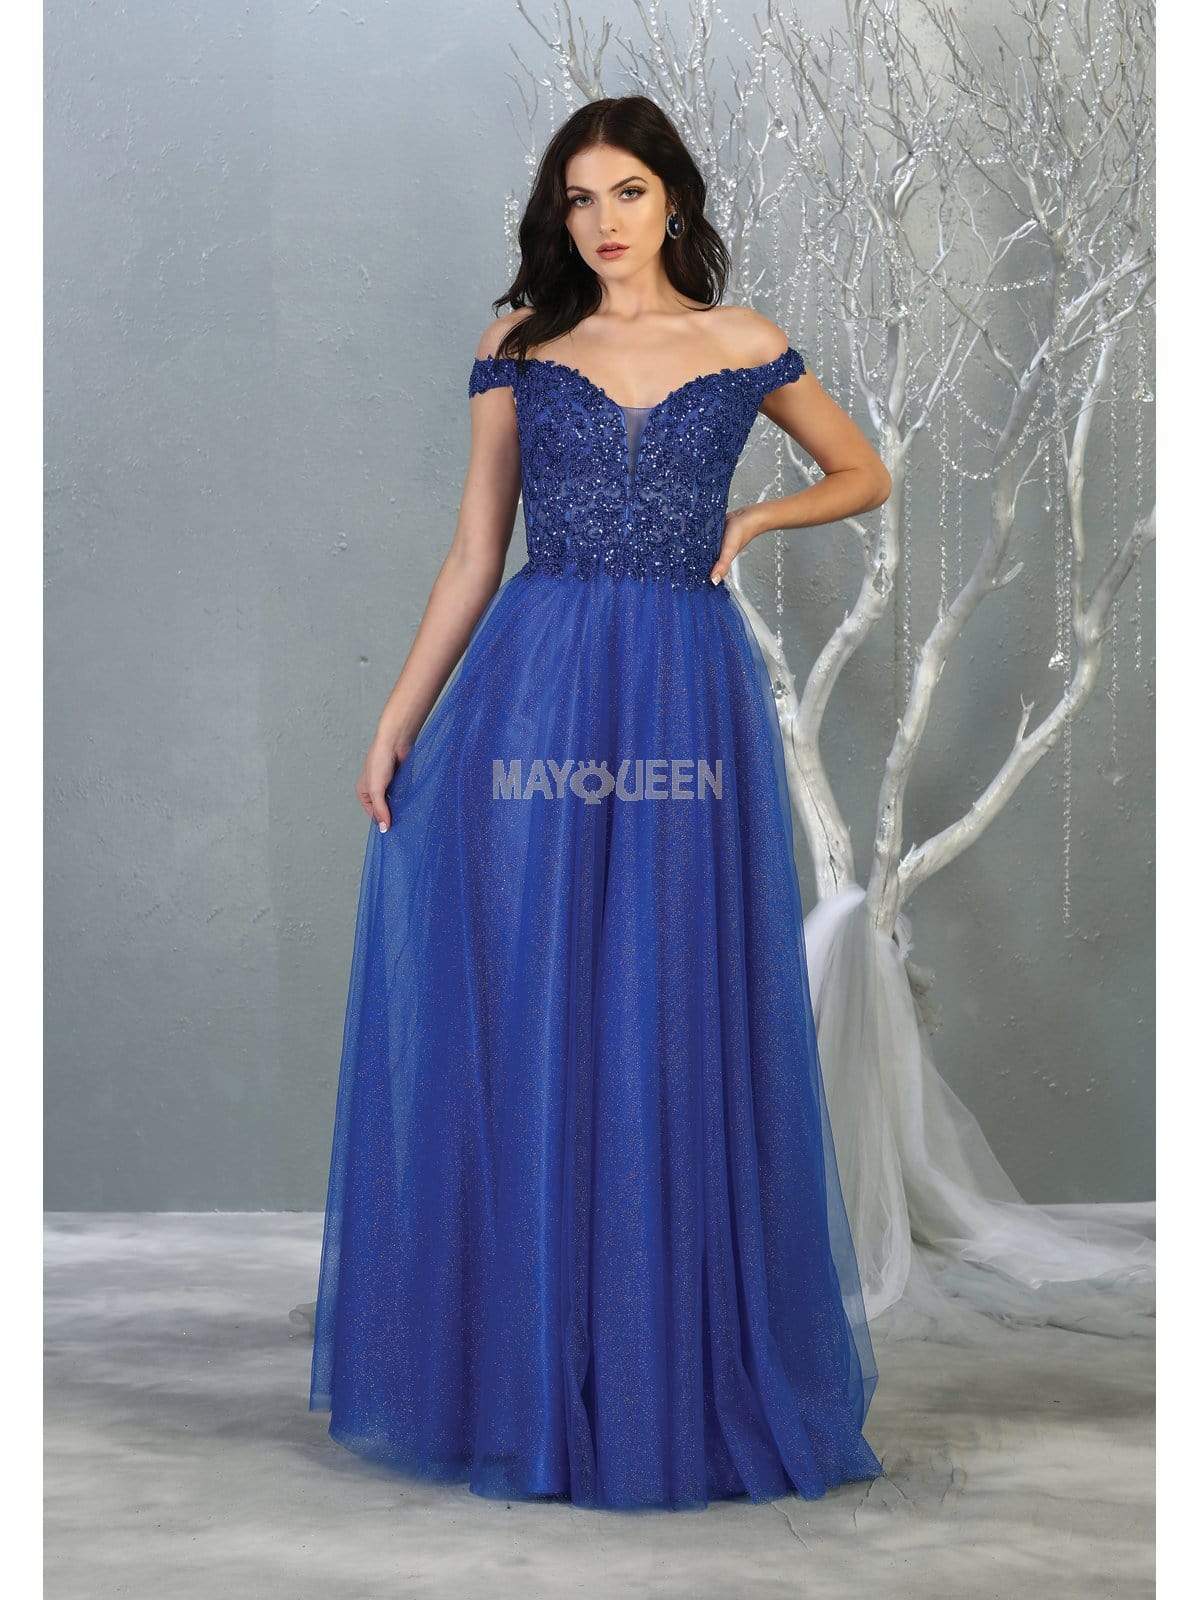 May Queen - RQ7864 Embellished Plunging Off-Shoulder Gown Prom Dresses 4 / Royal-Blue